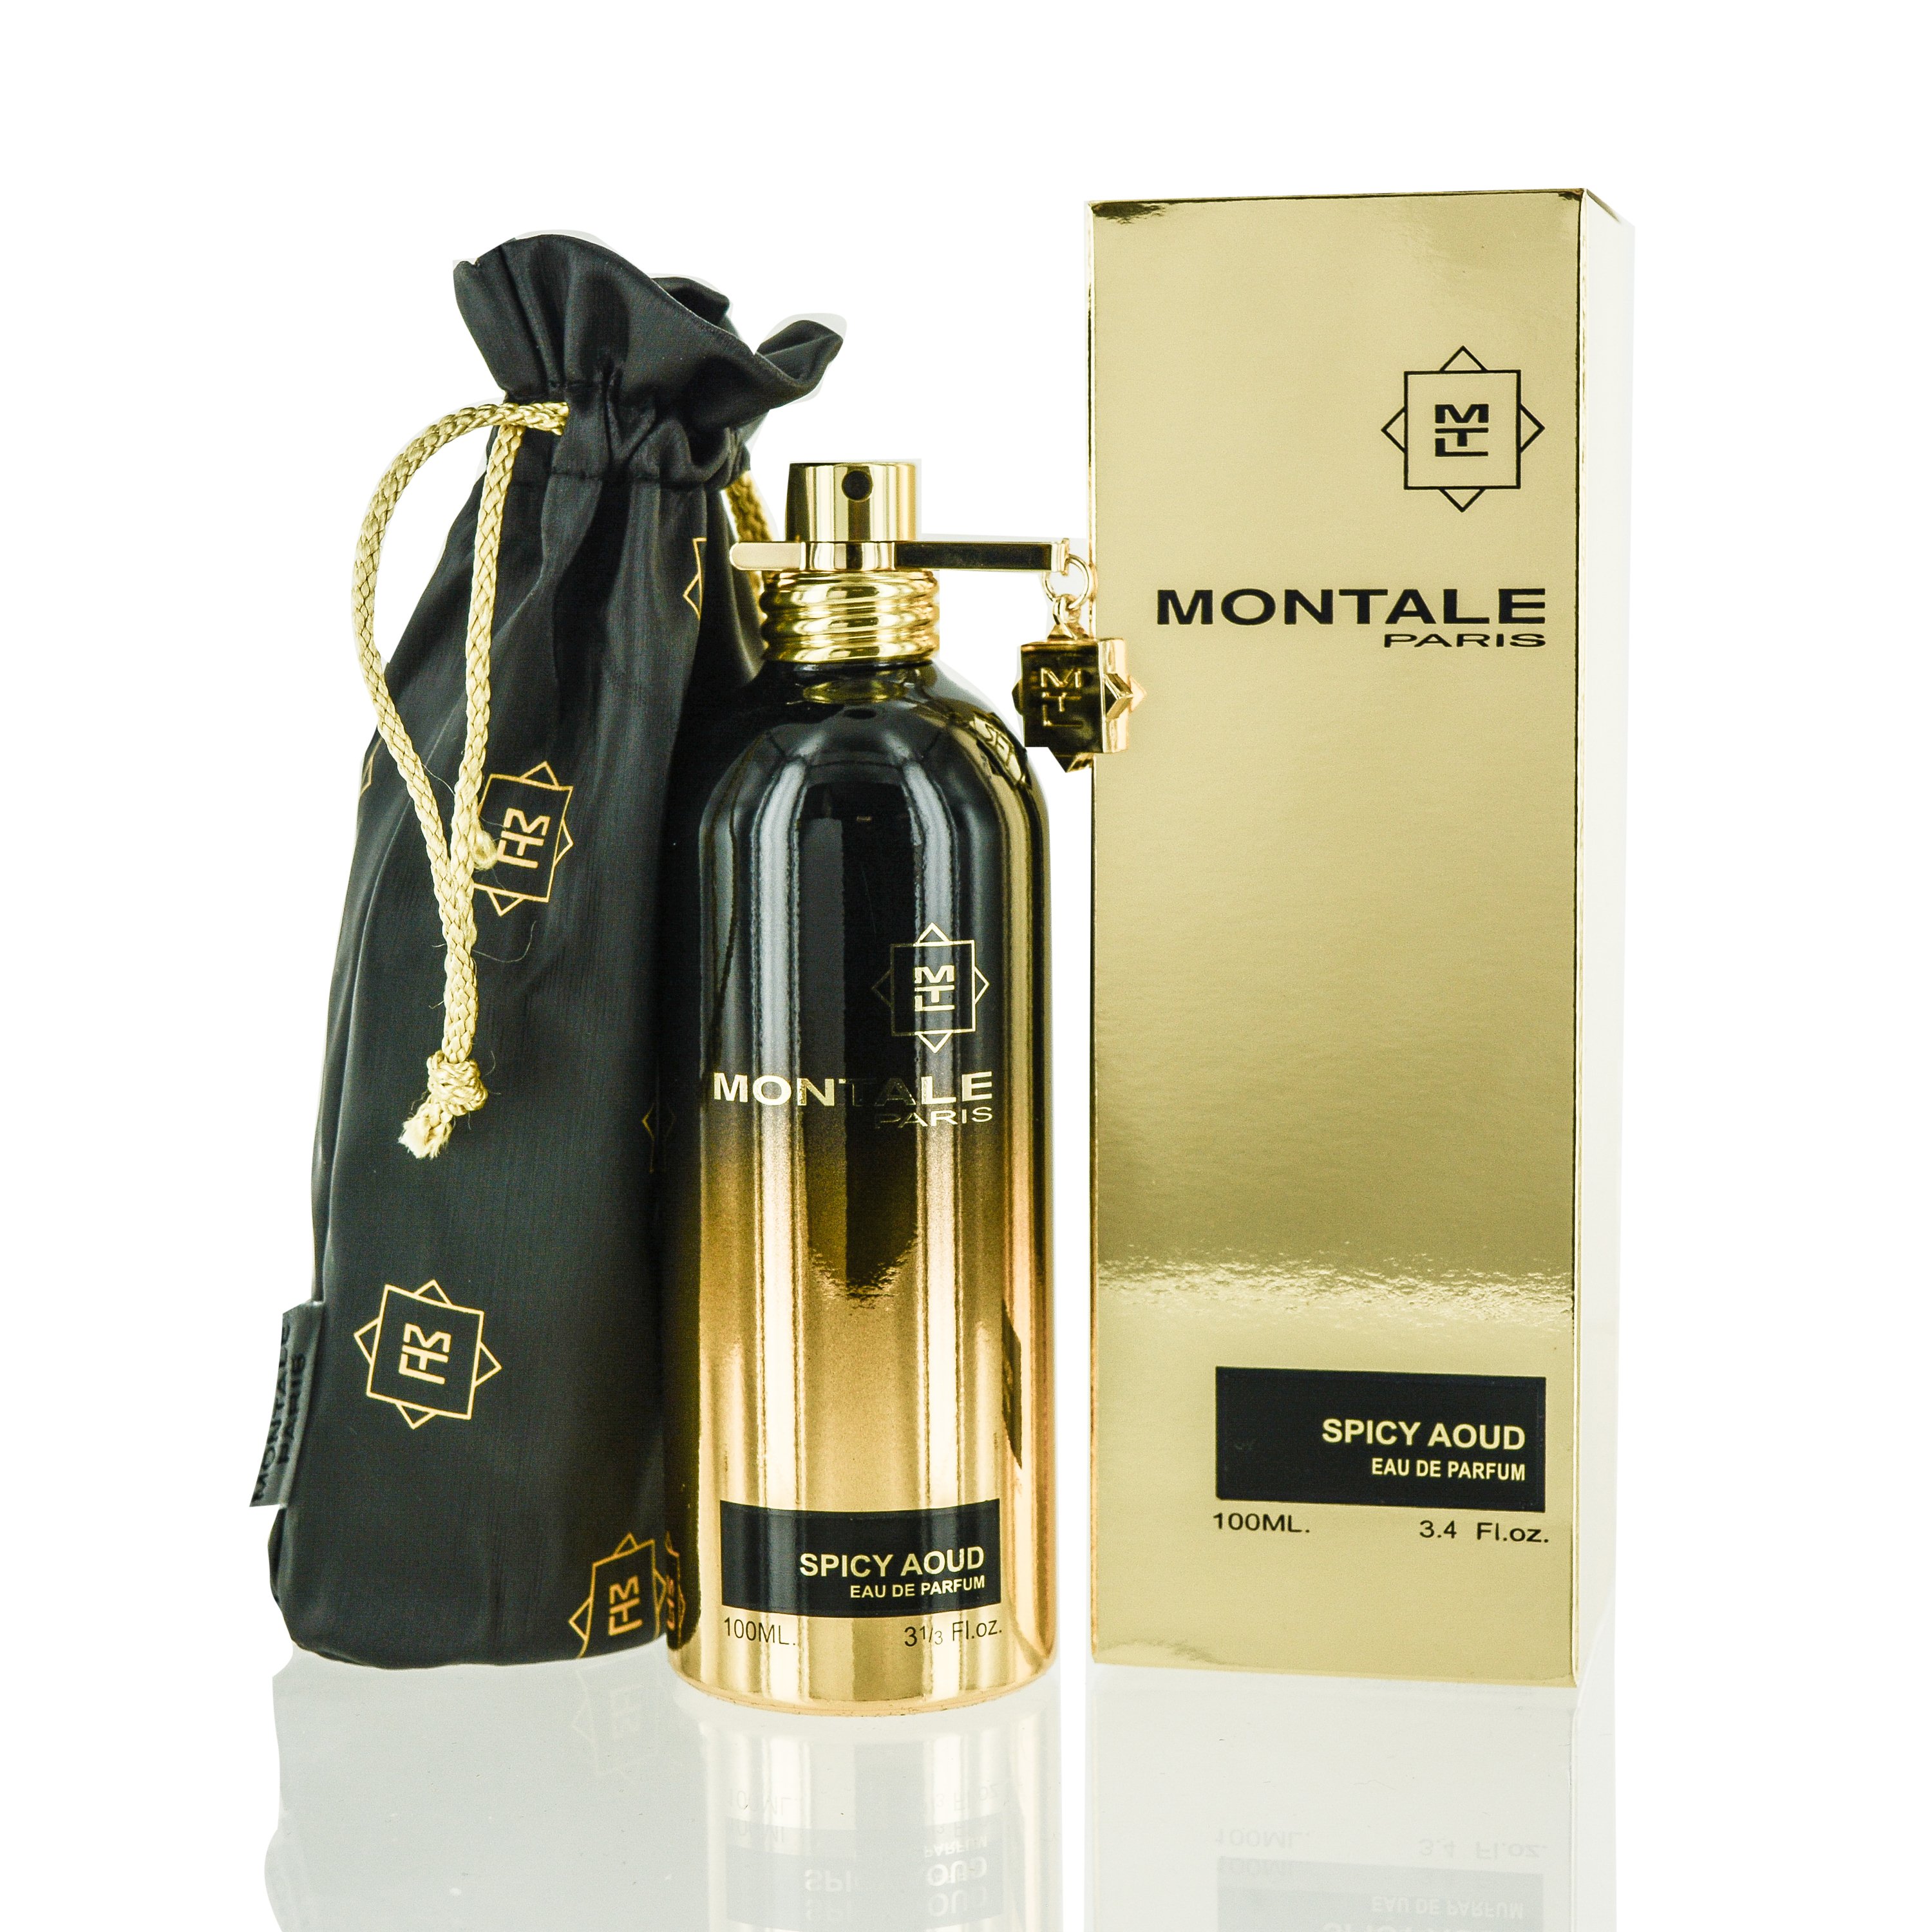 Montale мужские. Montale Spicy Aoud EDP 100 ml. Montale Aoud Night, 100 ml. Montale Spicy Aoud 100 мл. Montale Aoud Night EDP 2ml.